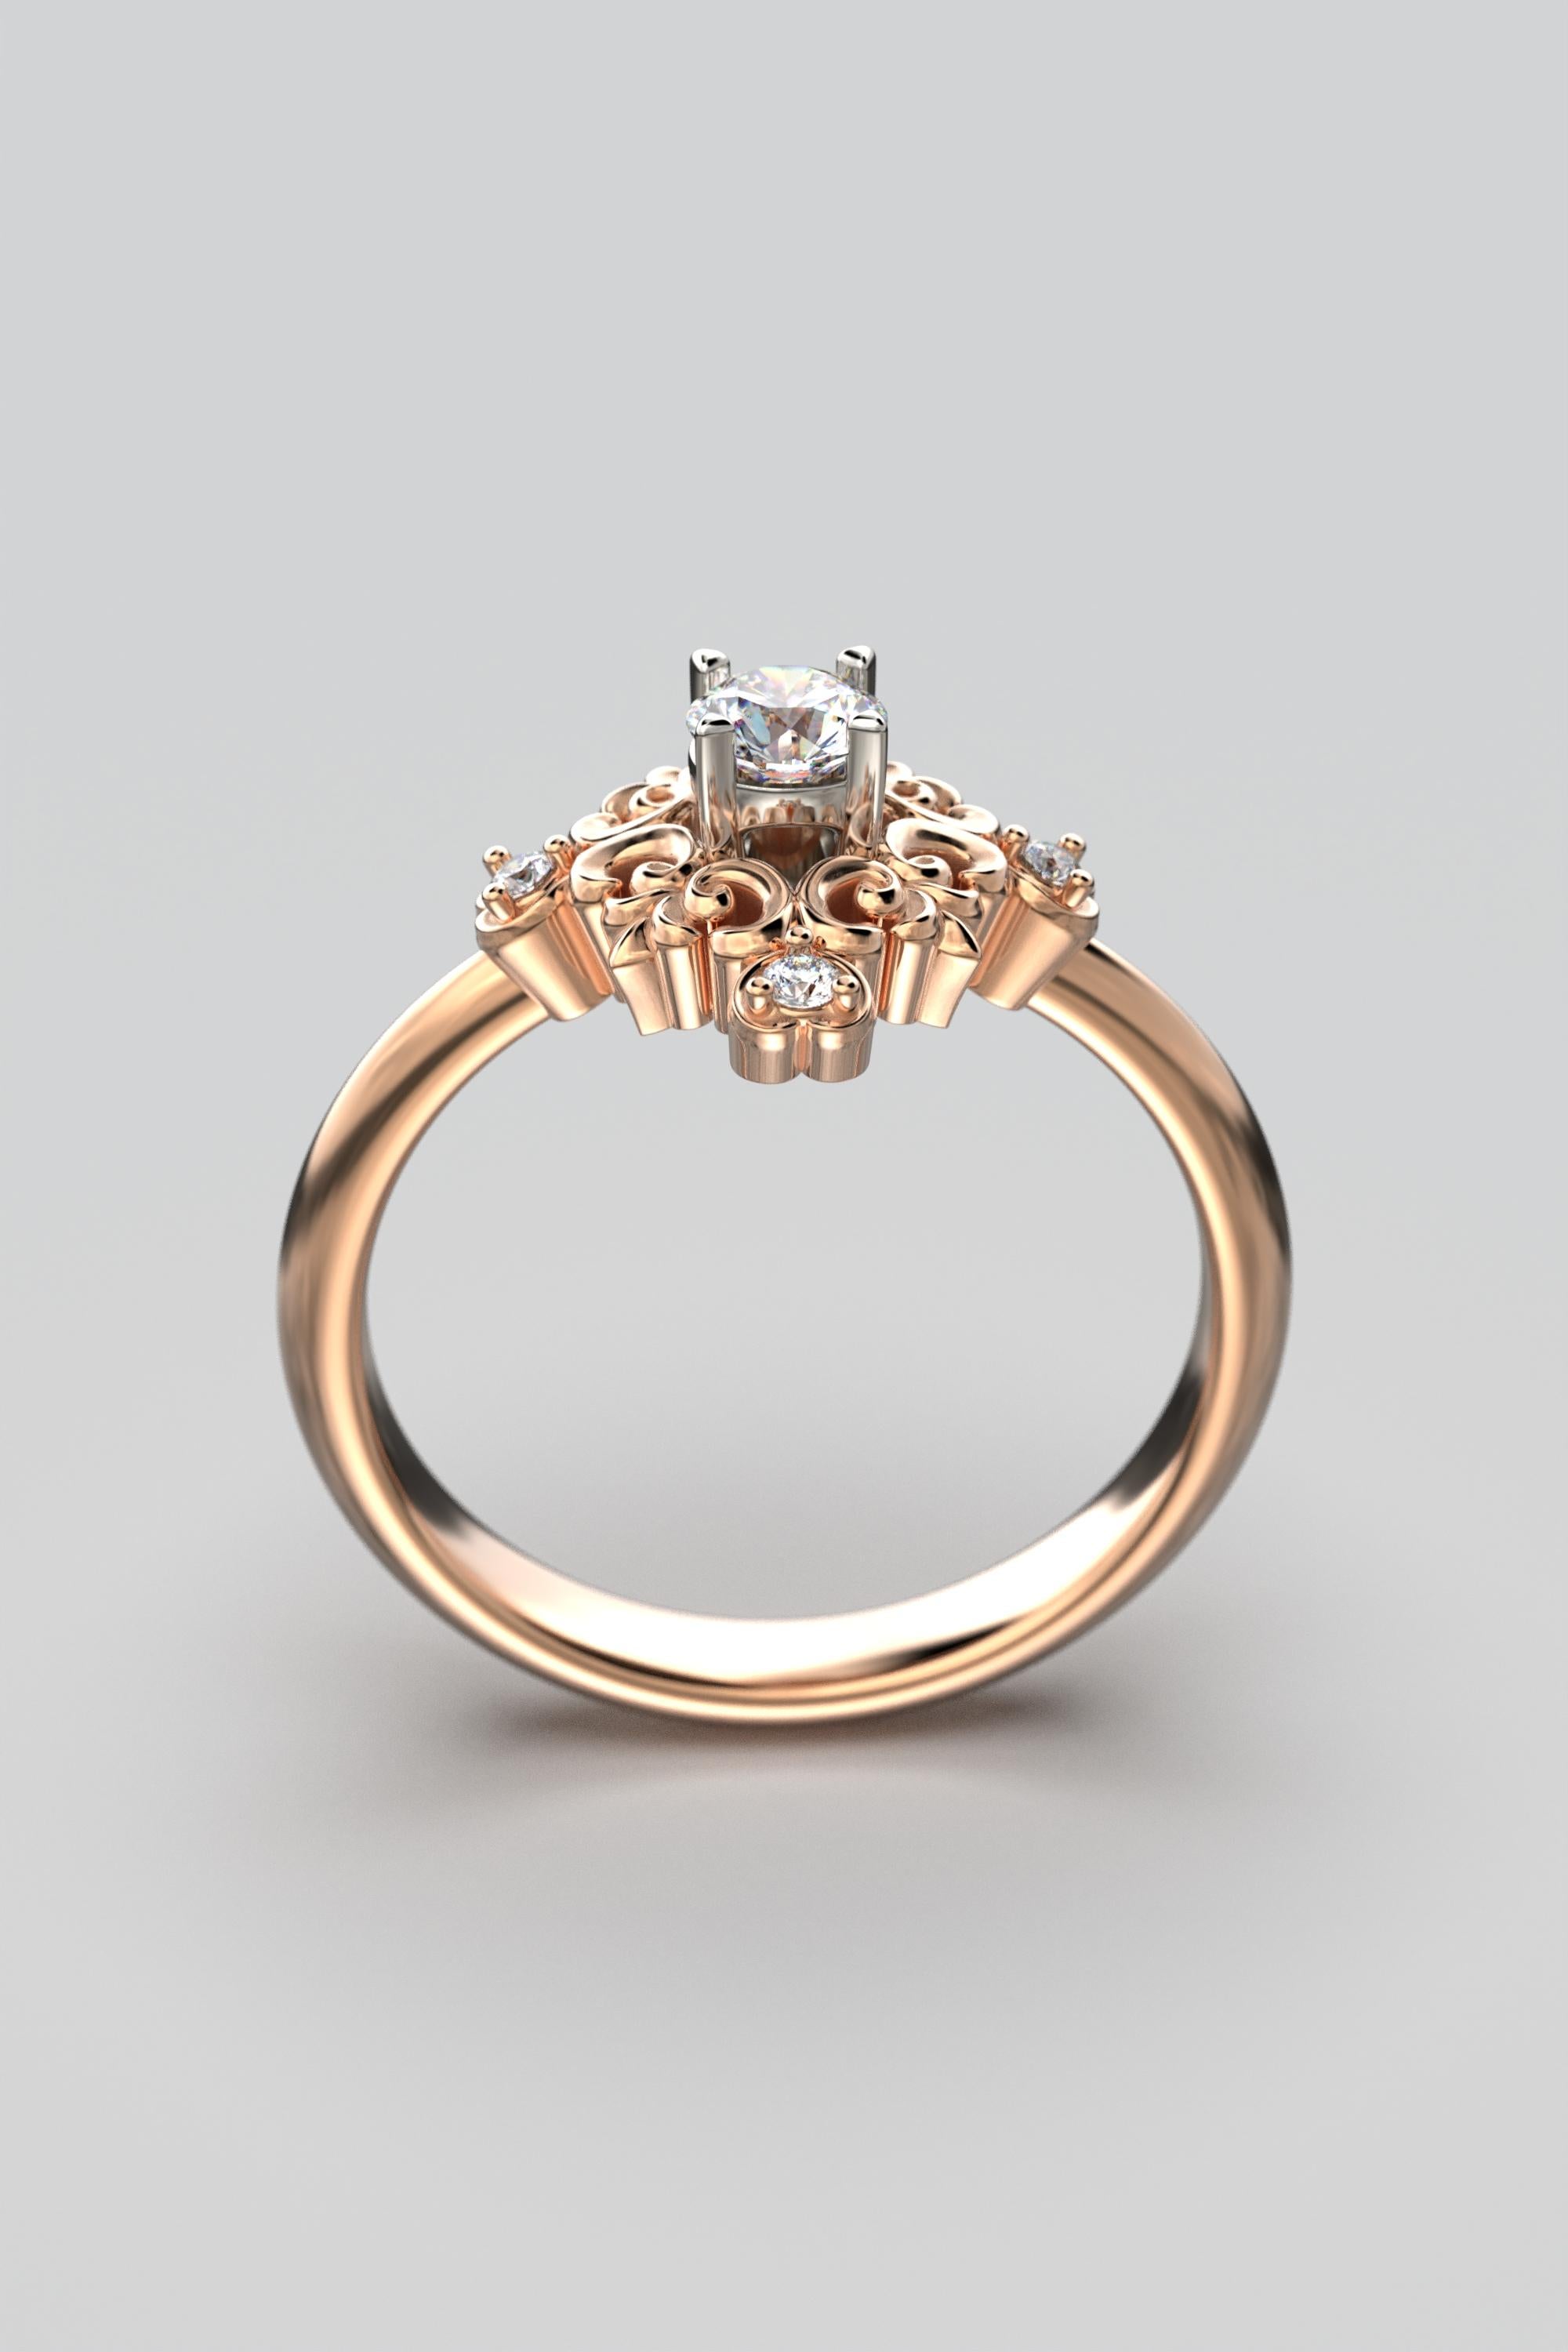 For Sale:  18k Gold Italian Diamond Engagement Ring in Baroque Style by Oltremare Gioielli 9